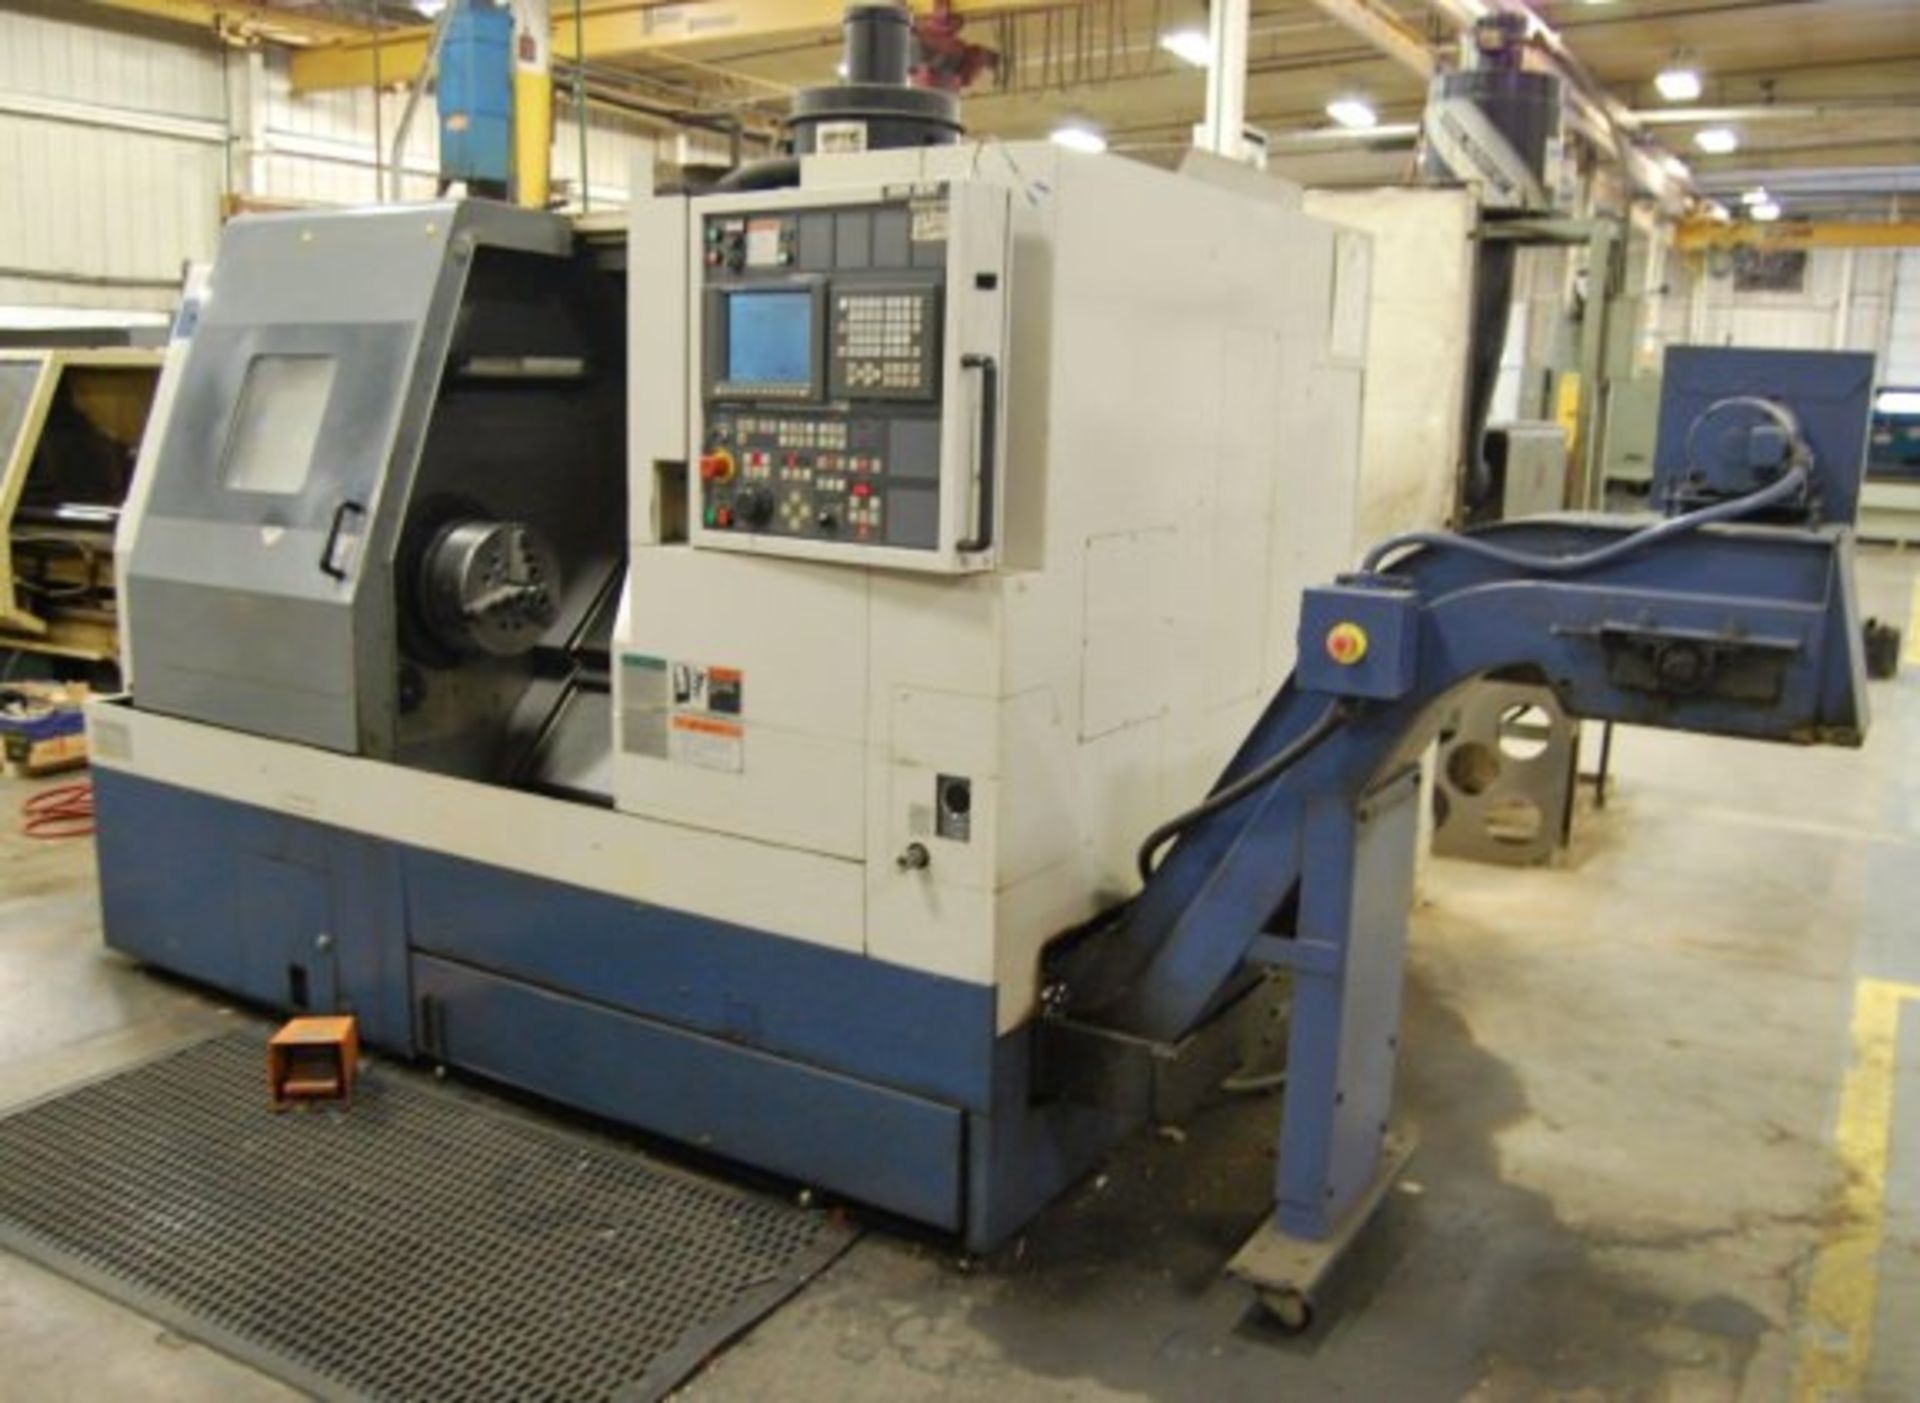 MORI SEIKI SL300A CNC Slant Bed Turning Center, 28.1" Swing Over Bed, 19.7"   Swing Over Cross - Image 2 of 10